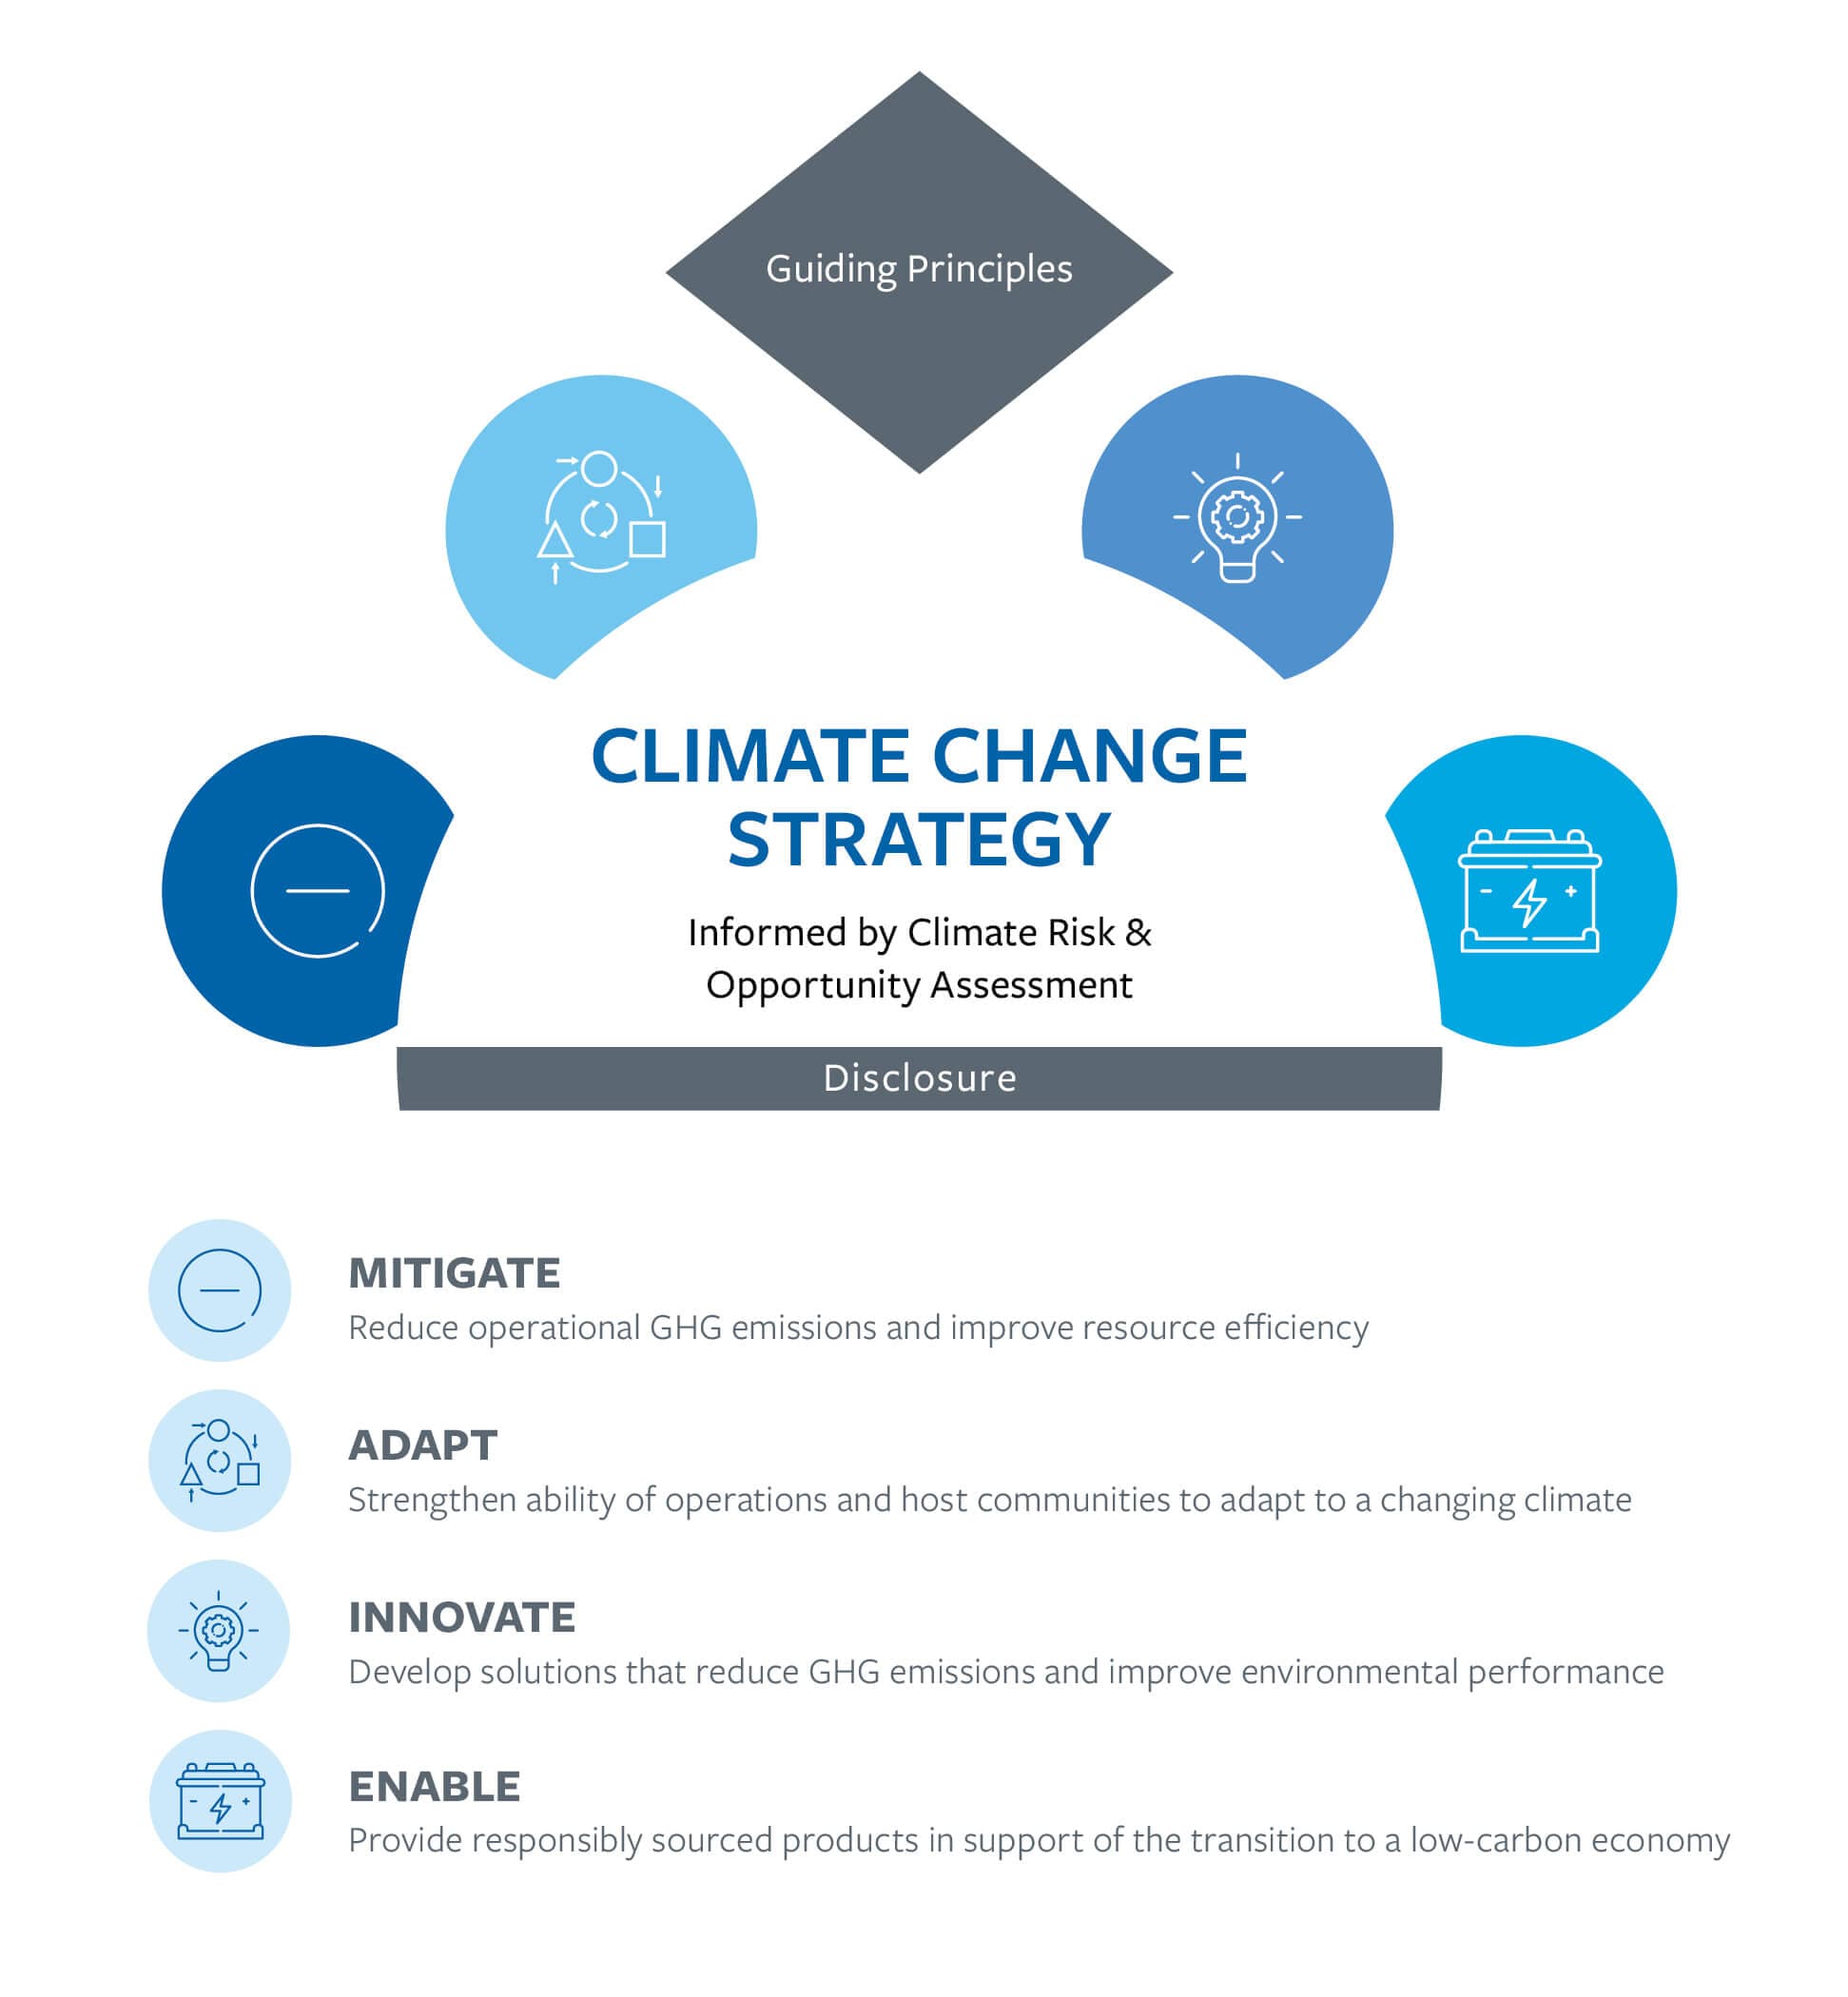 A graphic outlining Sherritt’s approach to addressing climate change using four guiding principles (informed by Climate Risk and Opportunity Assessment): 1) Mitigate: Reduce operational GHG emissions and improve resource efficiency; 2) Adapt: Strengthen the ability of operations and host communities to adapt to a changing climate; 3) Innovate: Develop solutions that reduce GHG emissions and improve environmental performance; 4) Enable: Provide responsibly sourced products in support of the transition to a low-carbon economy